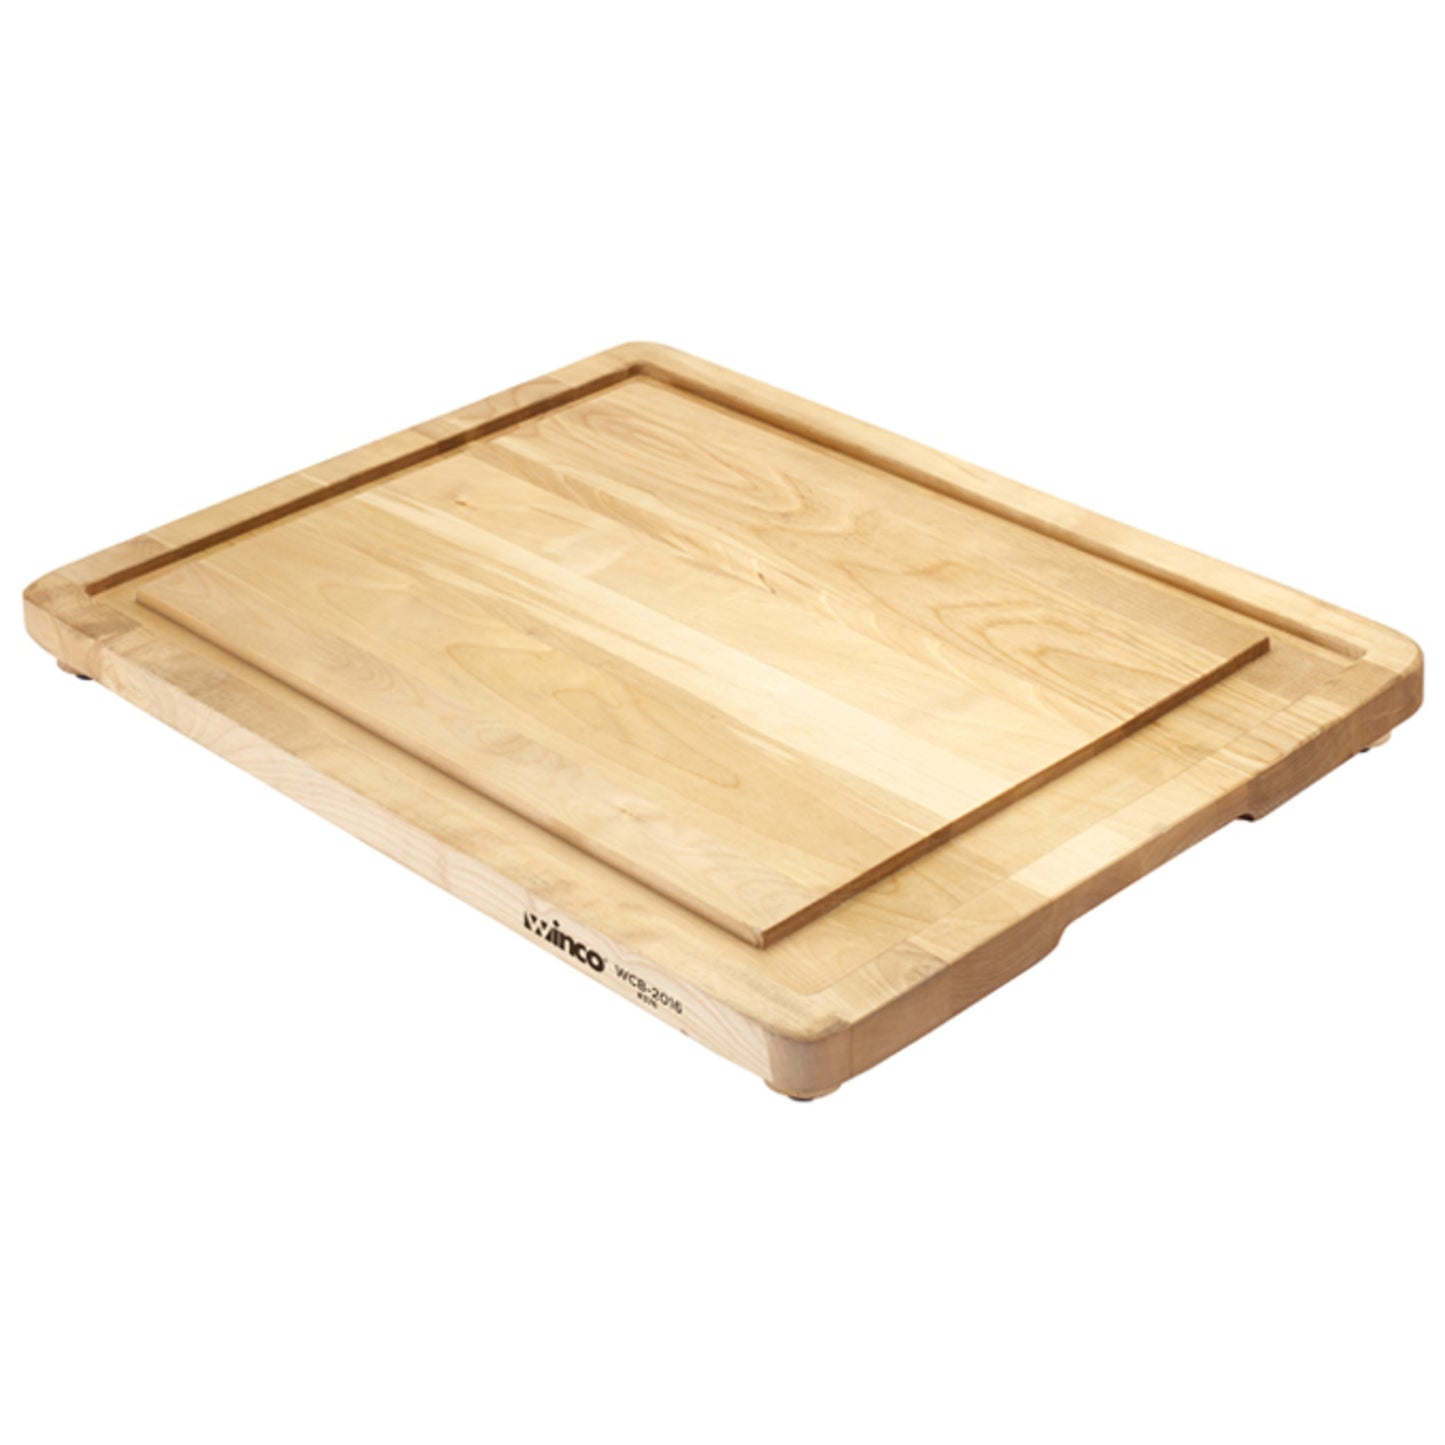 Wooden Carving Board with Channel